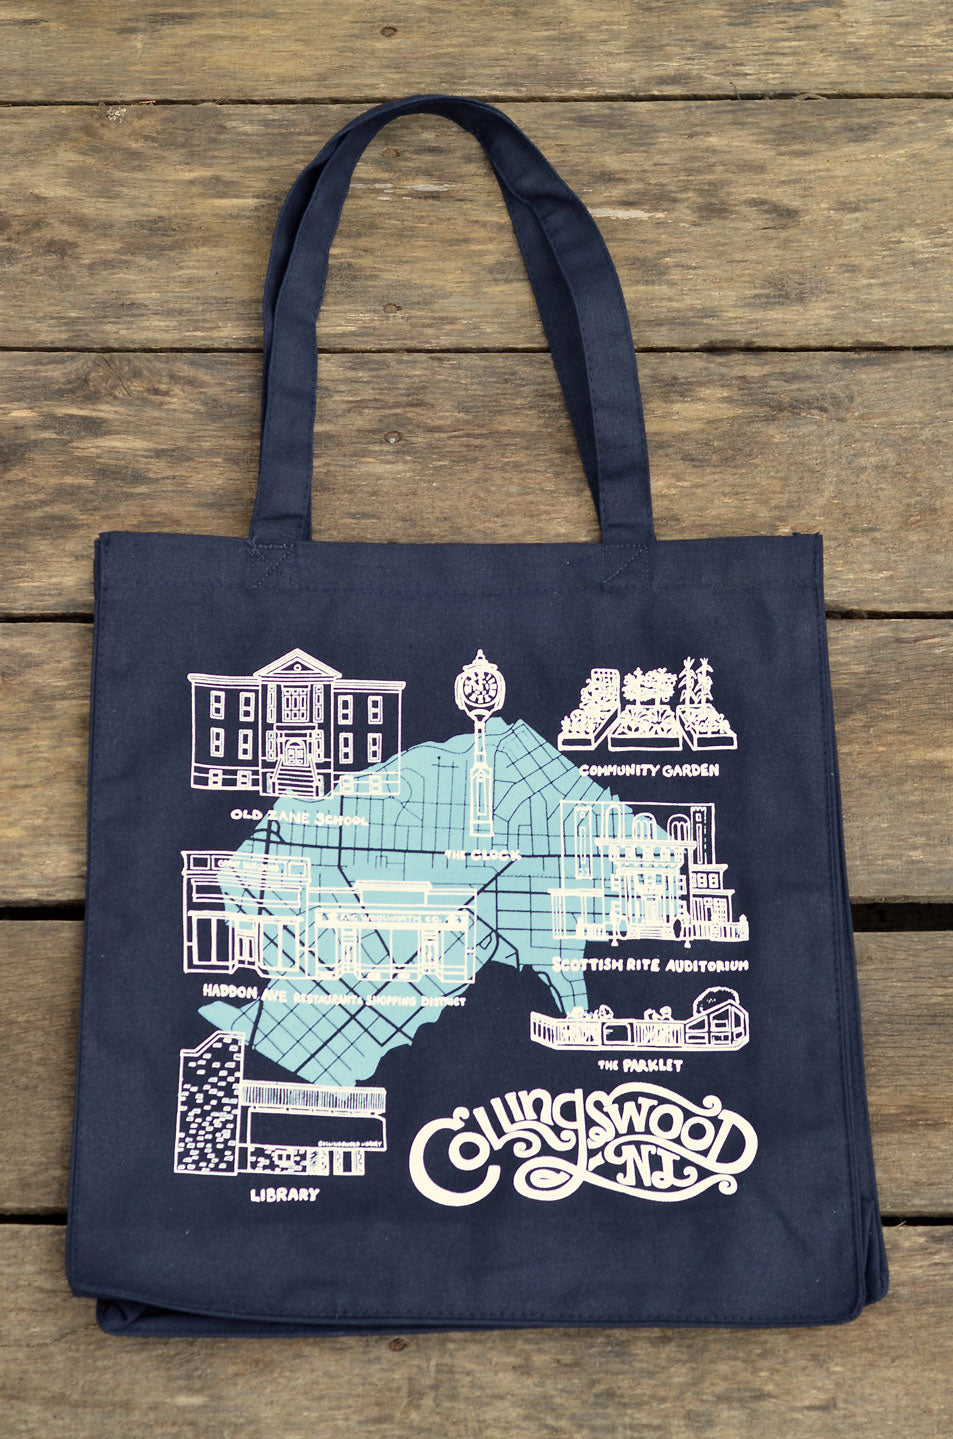 Collingswood New Jersey Tote Bag with map and illustrations of popular landmarks - Navy Blue tote Bag, with white and light blue screen printing ink